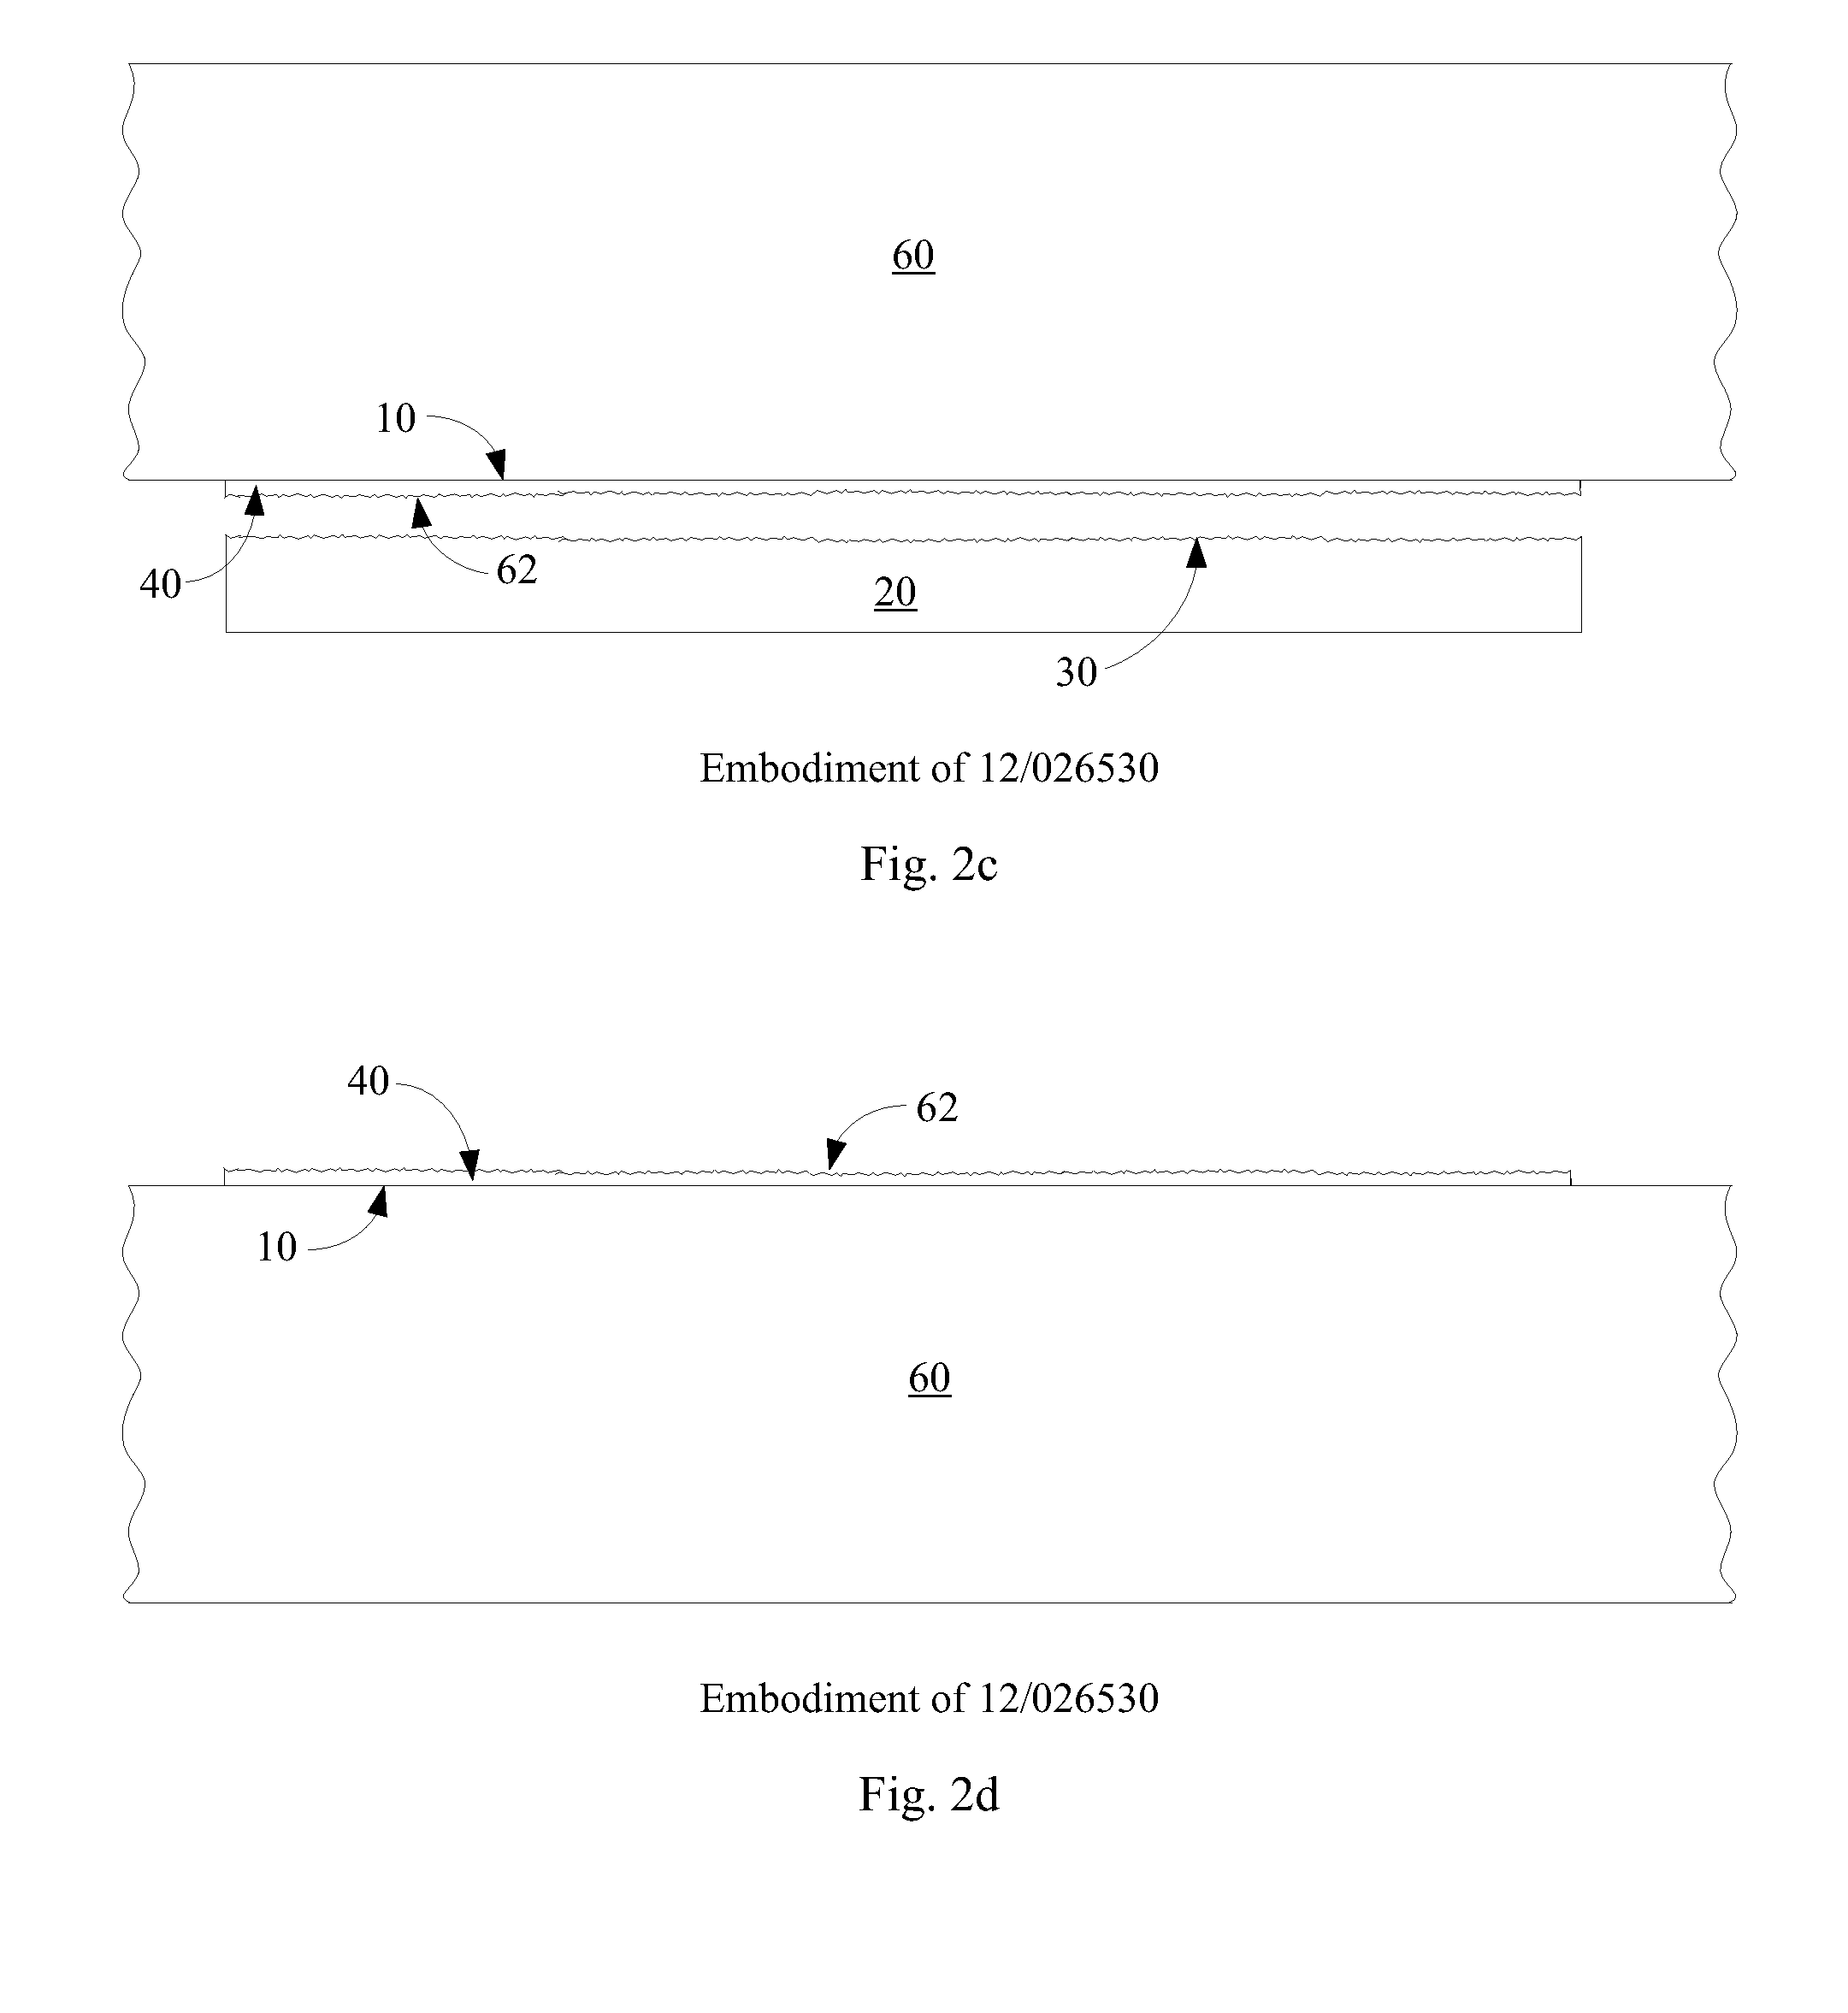 Method for preparing a donor surface for reuse